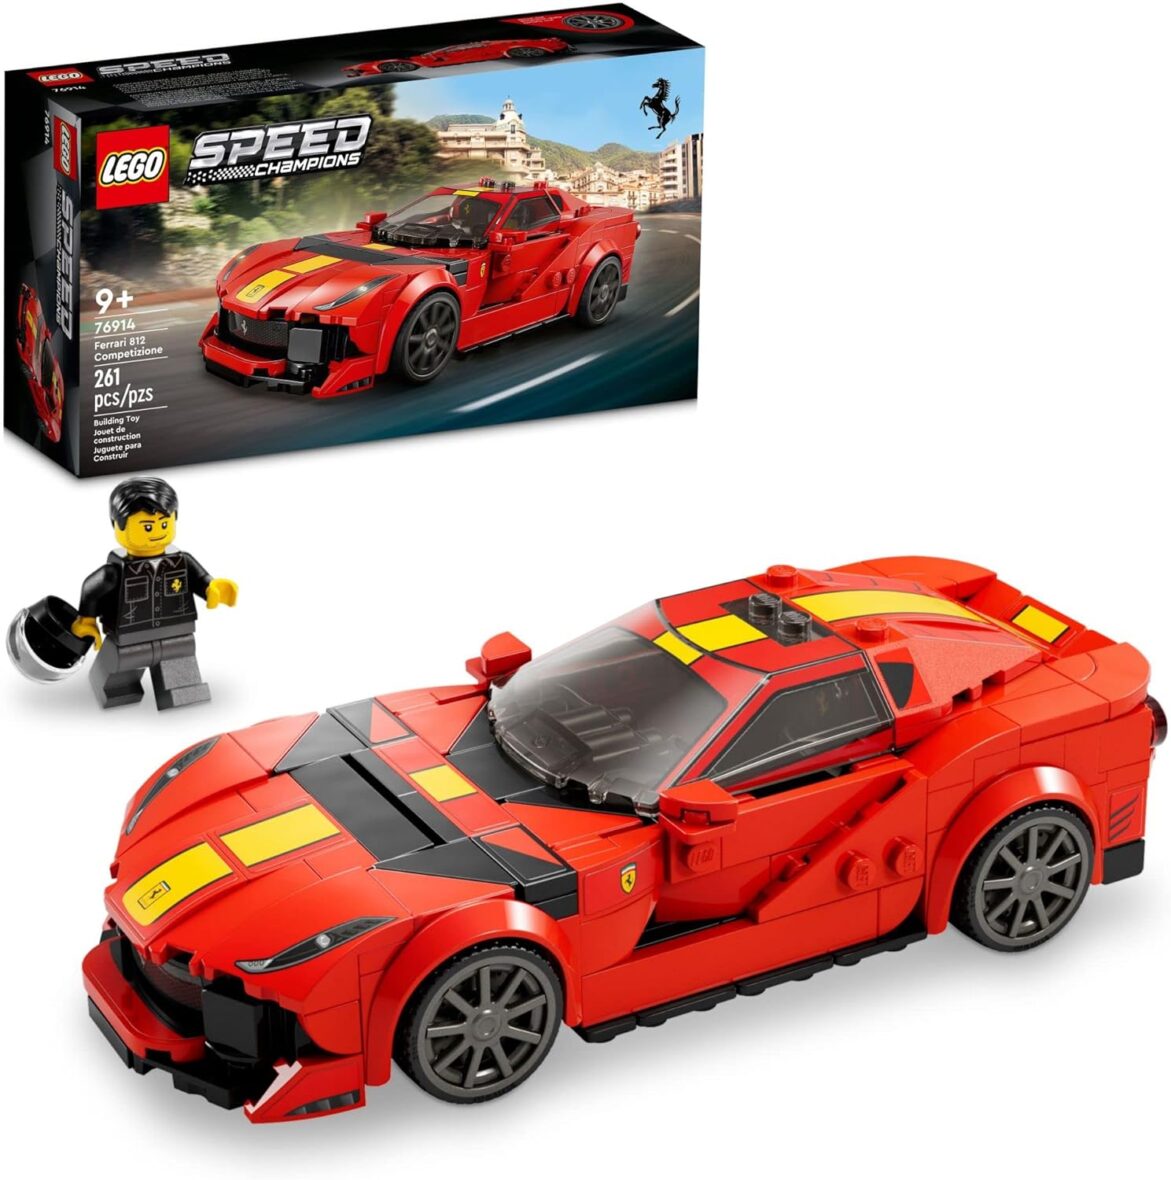 LEGO Speed Champions 1970 Ferrari 512 M Toy Car Model Building Kit 76914 Sports Red Race Car Toy, Collectible Set with Racing Driver Minifigure